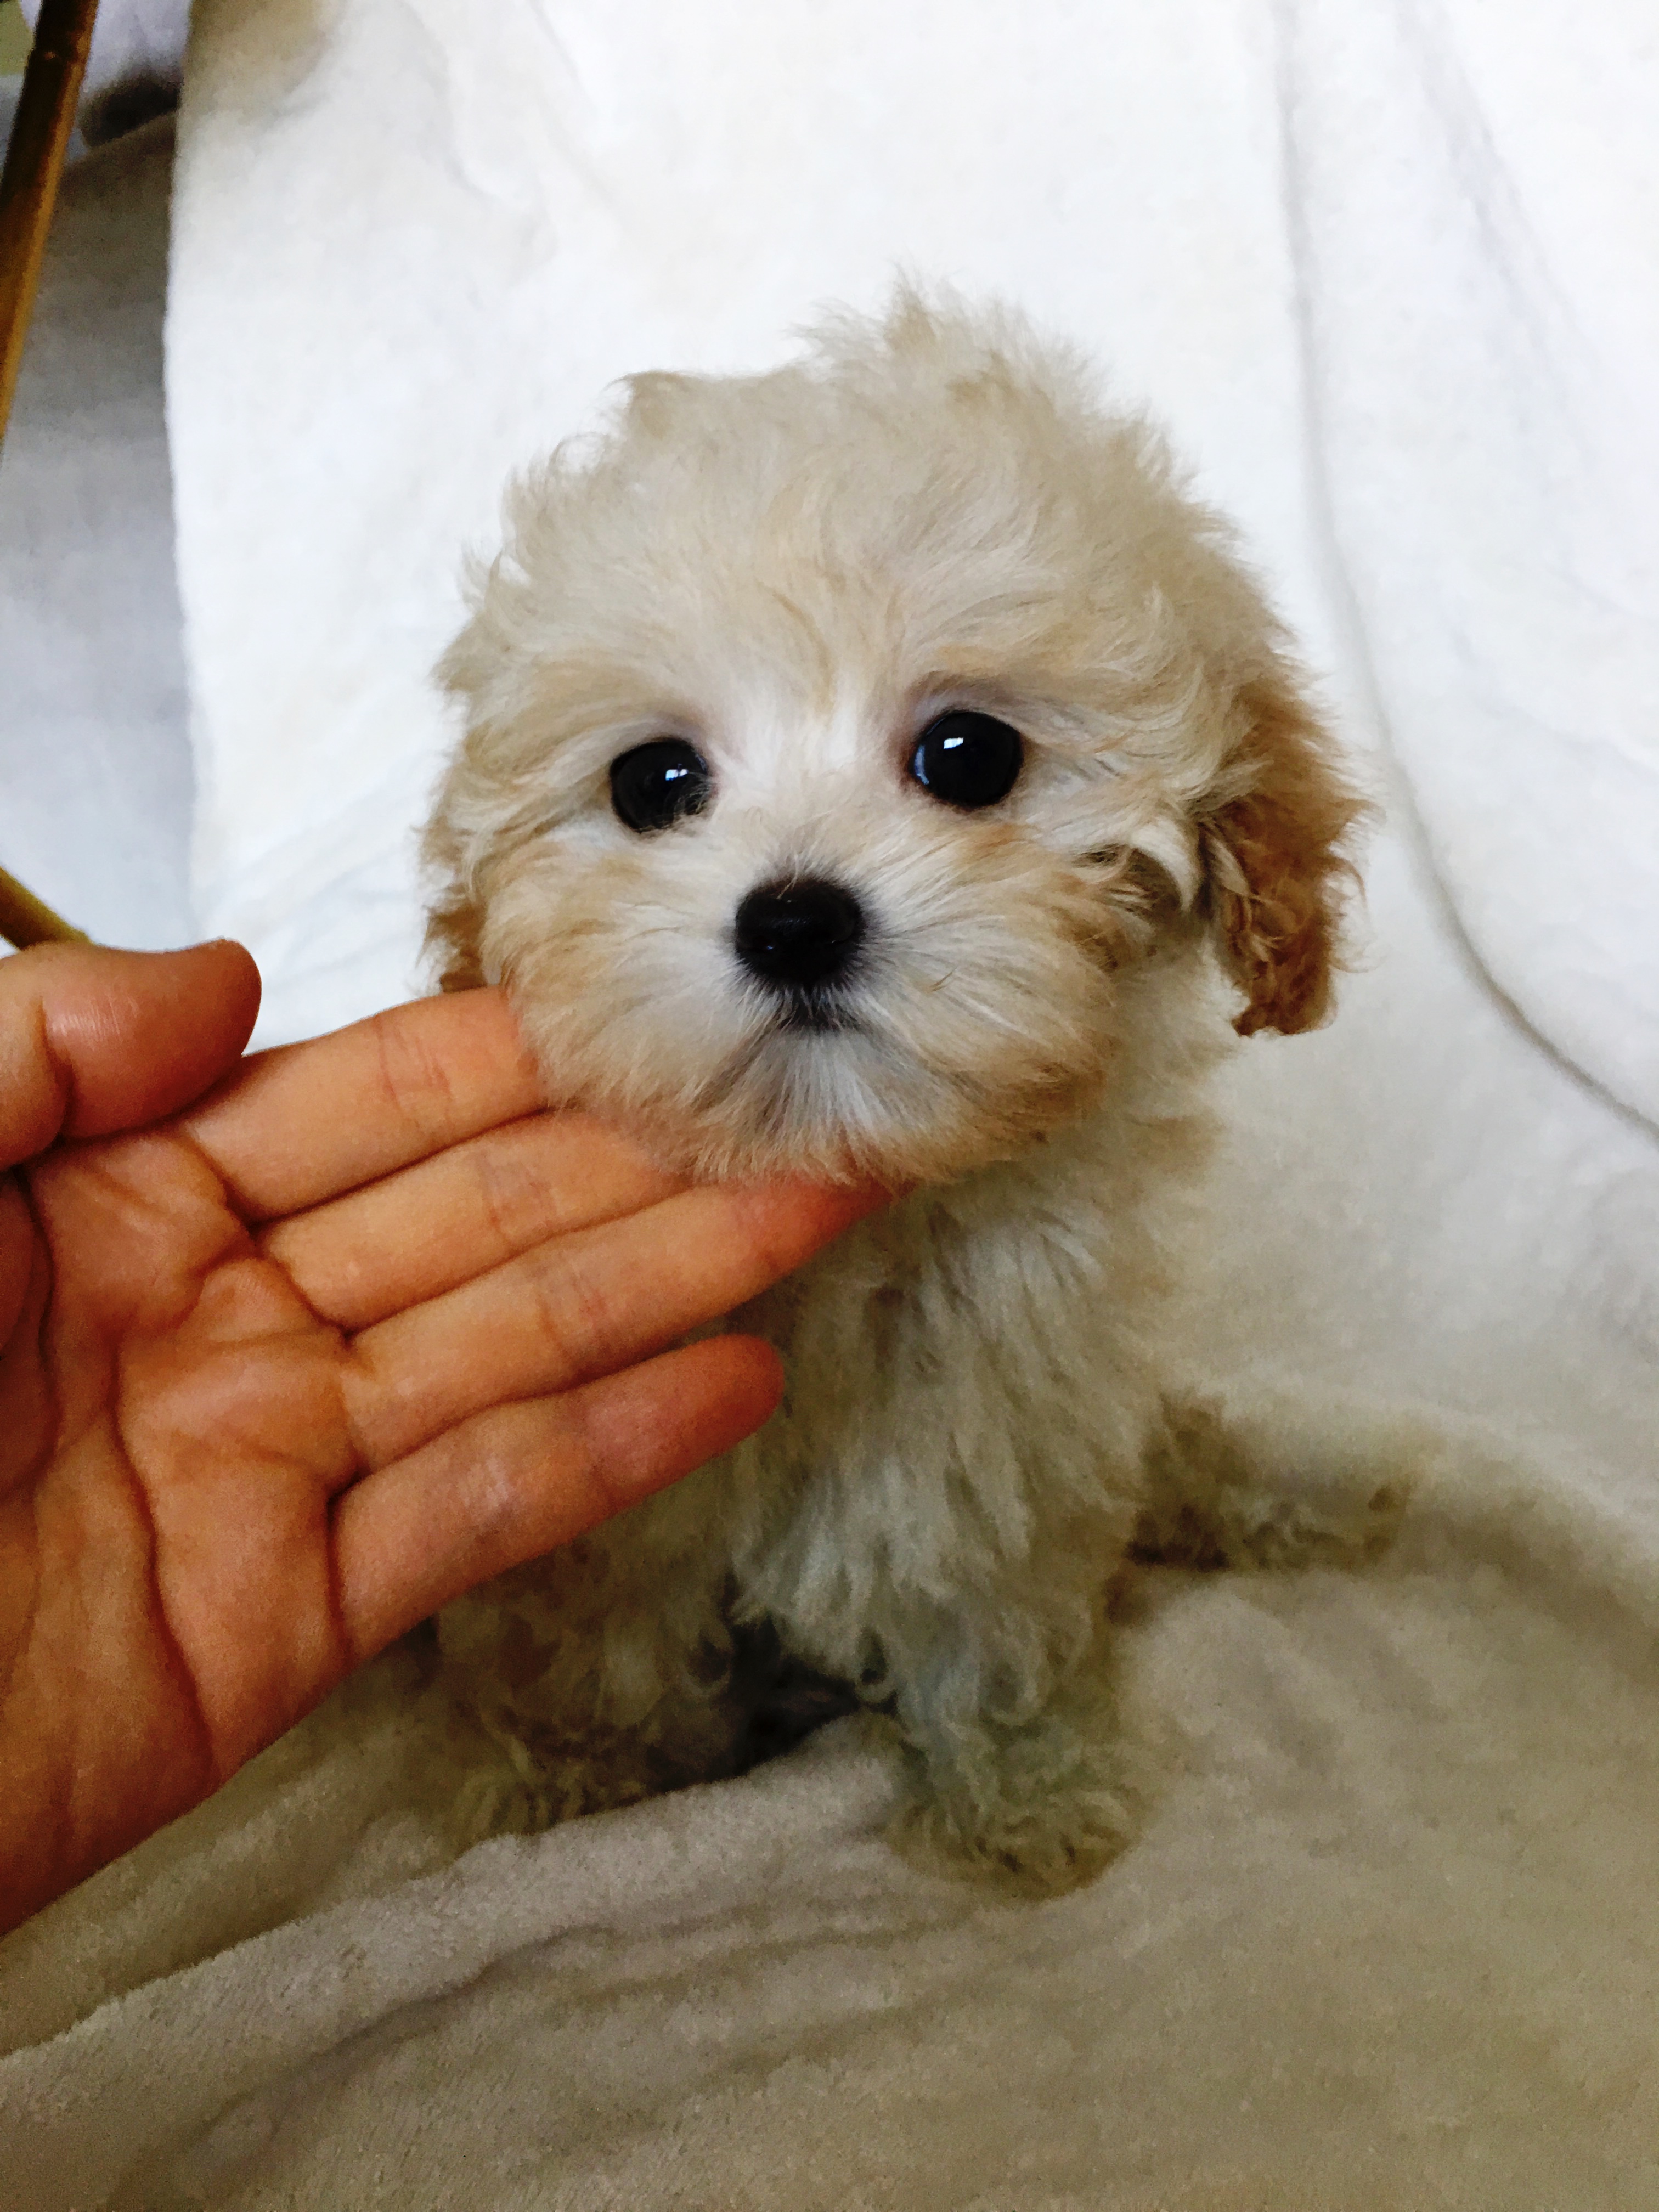 Teacup Maltipoo Puppy for sale los angeles, california iHeartTeacups